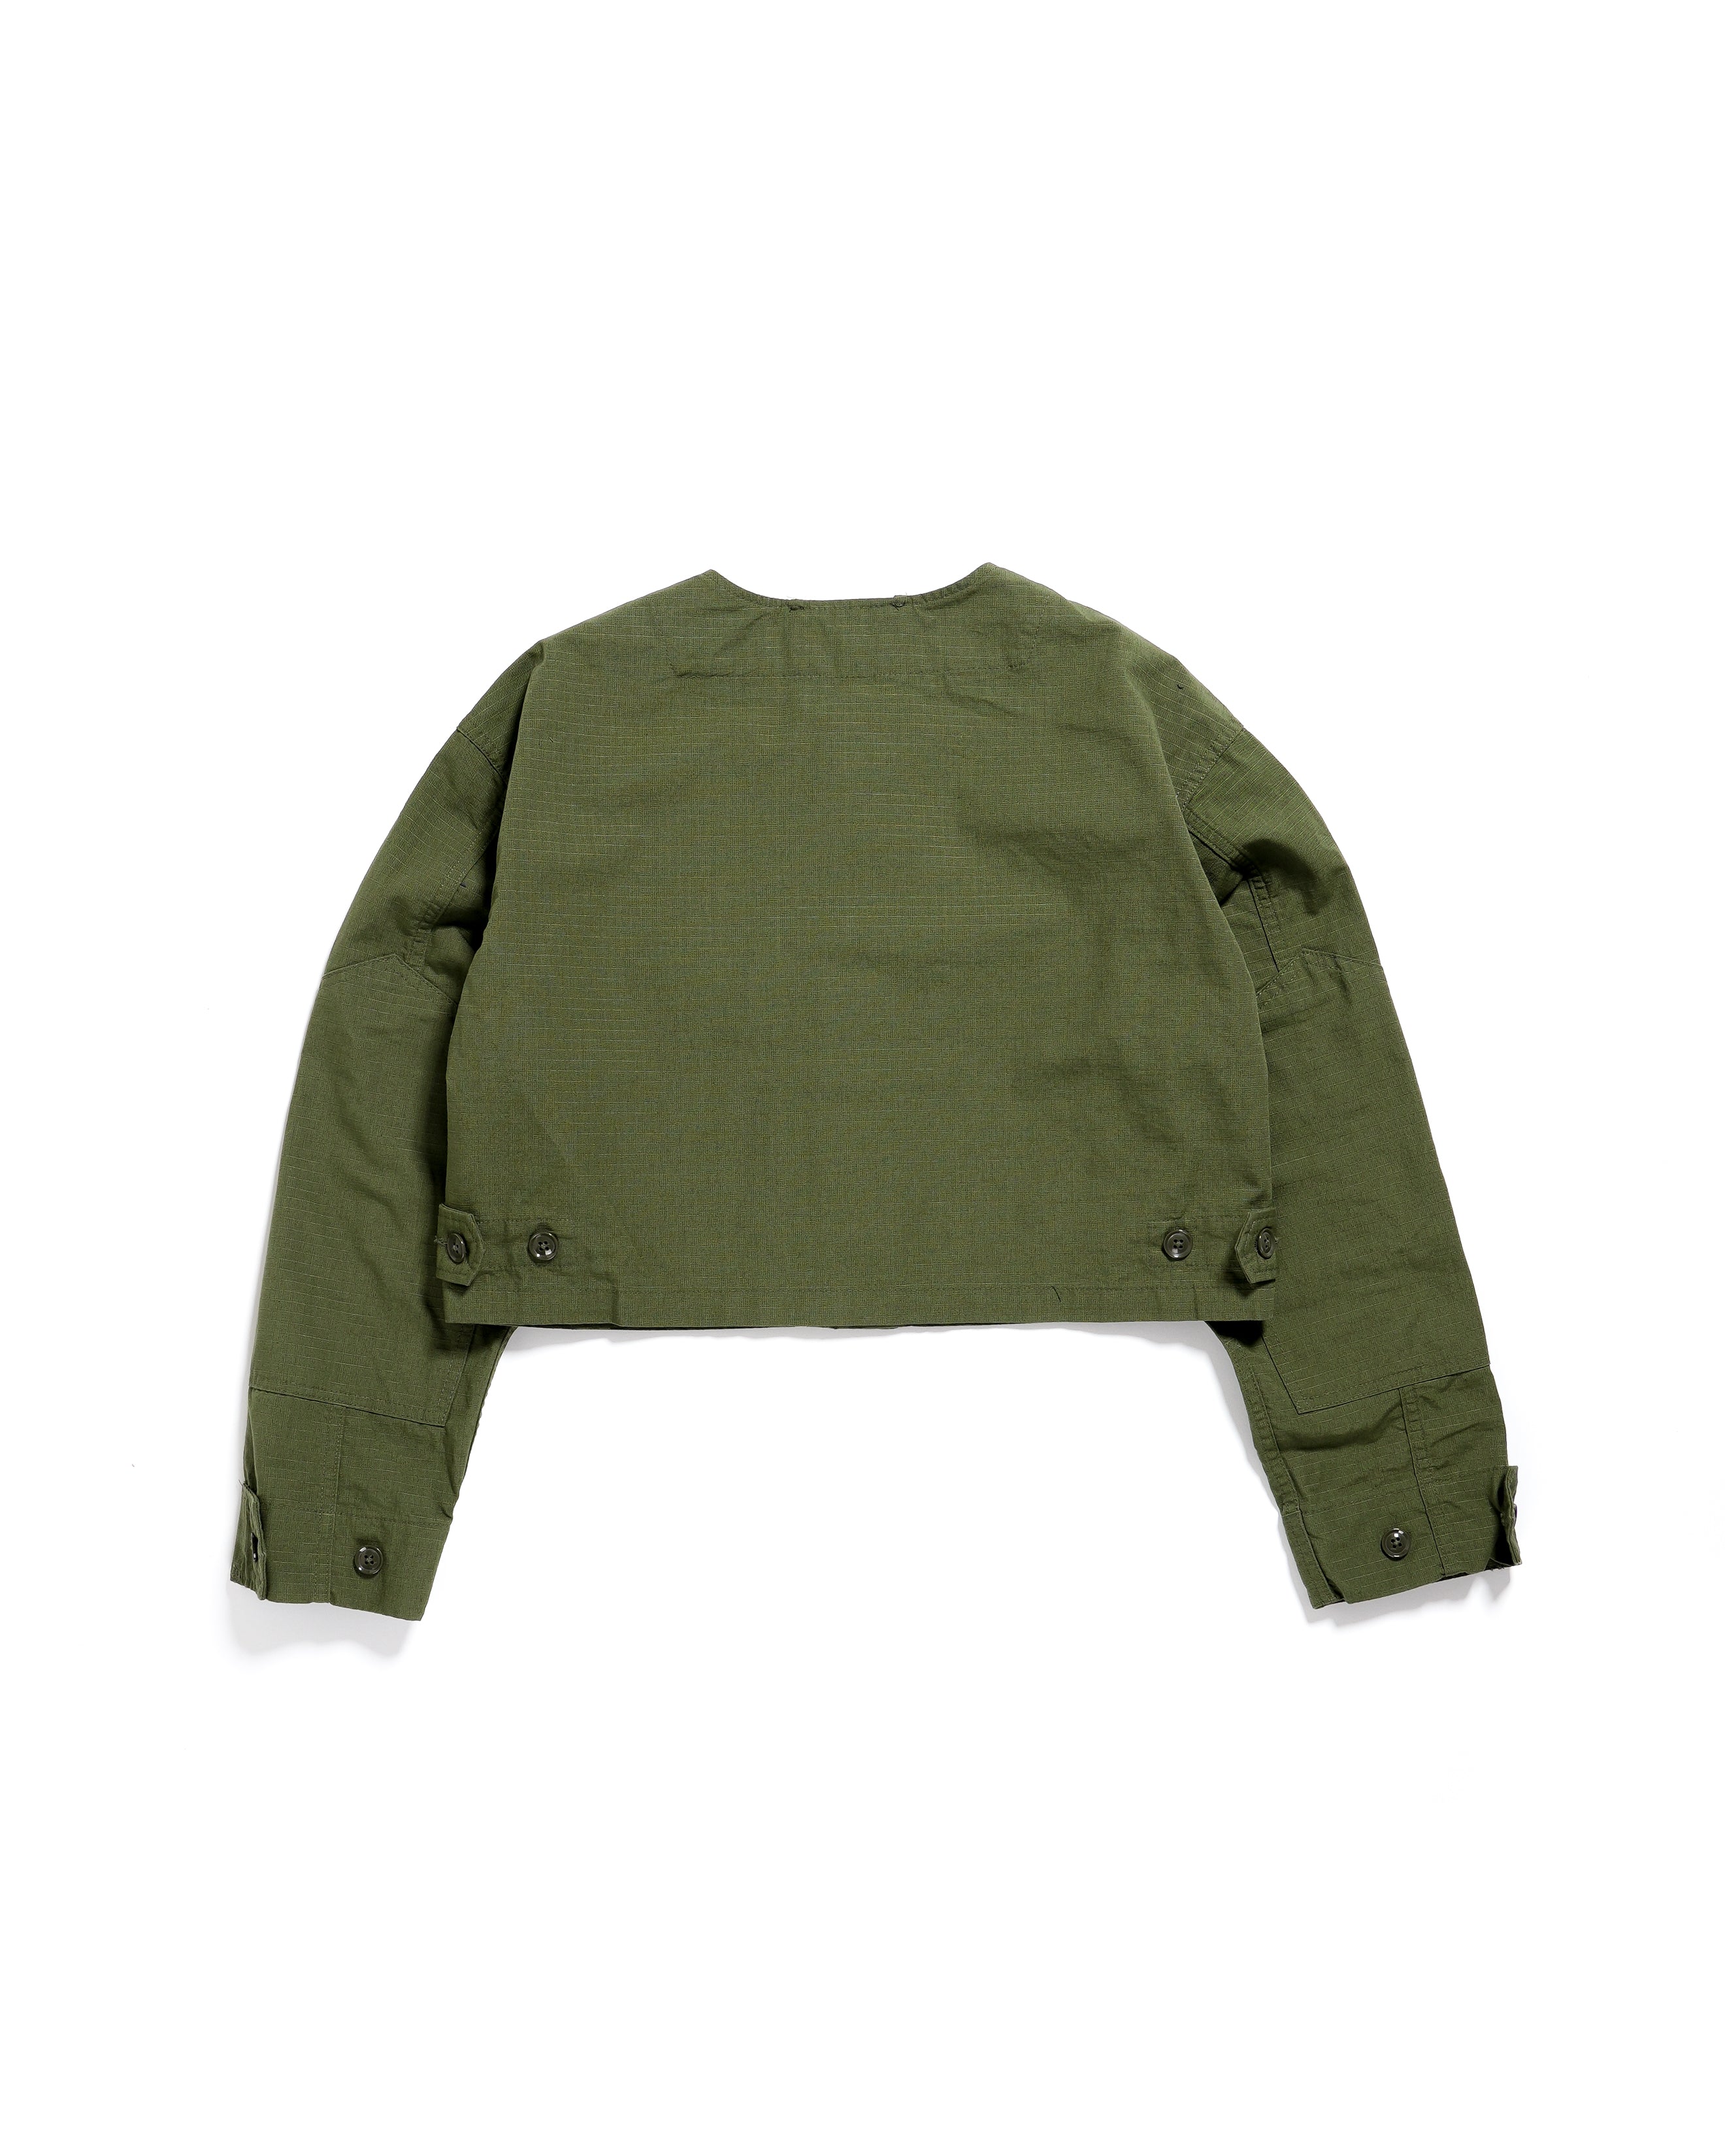 Cropped BDU Jacket - Olive Cotton Ripstop